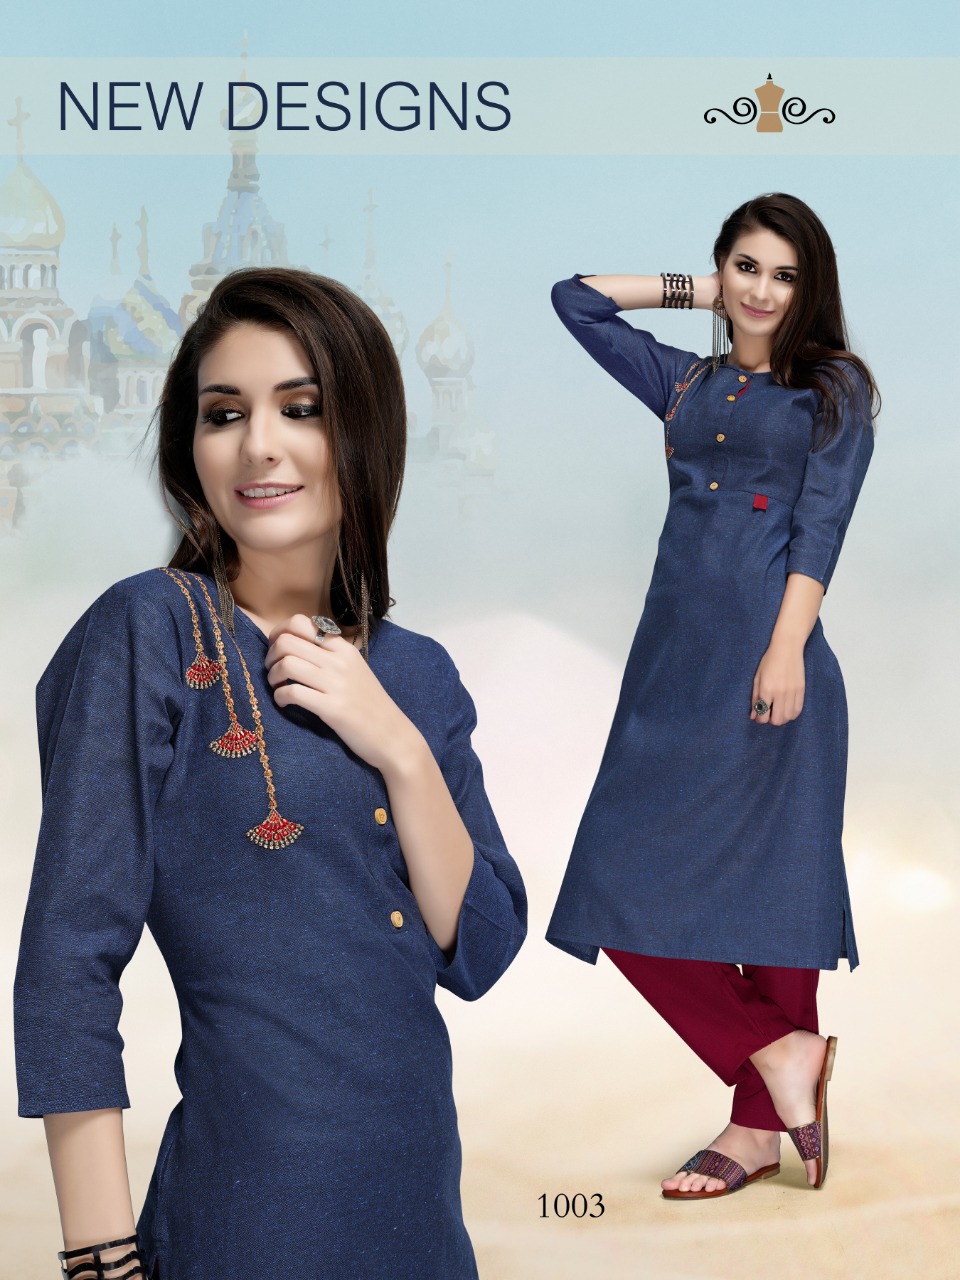 Prettify khaadi special ethnic wear cotton kurti and pant wholsaler